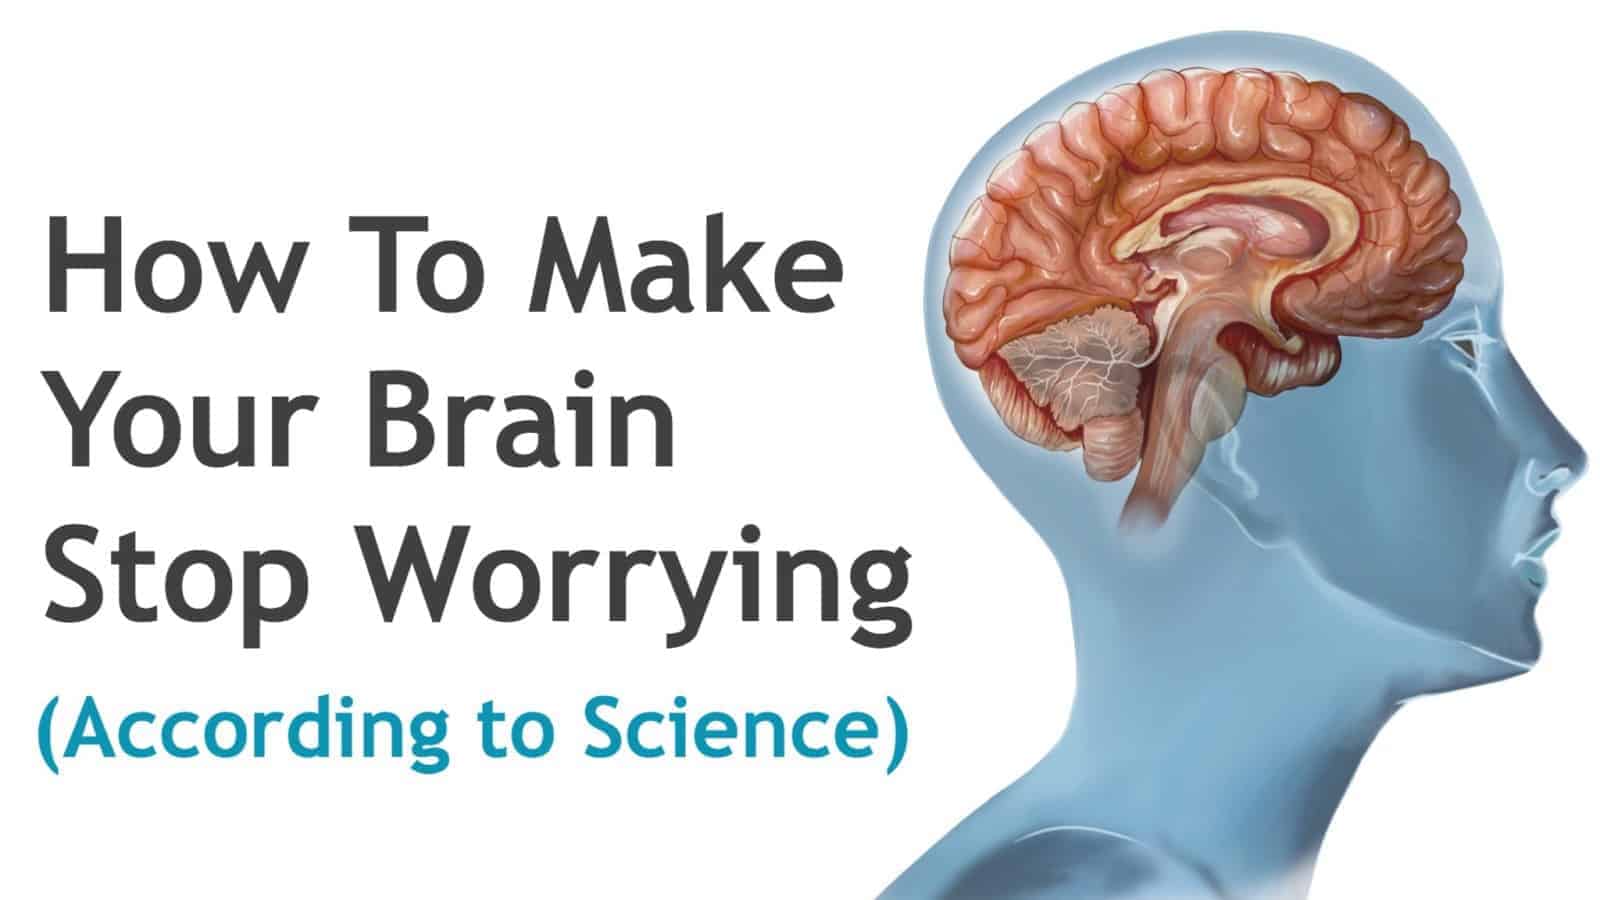 How To Make Your Brain Stop Worrying, According to Science